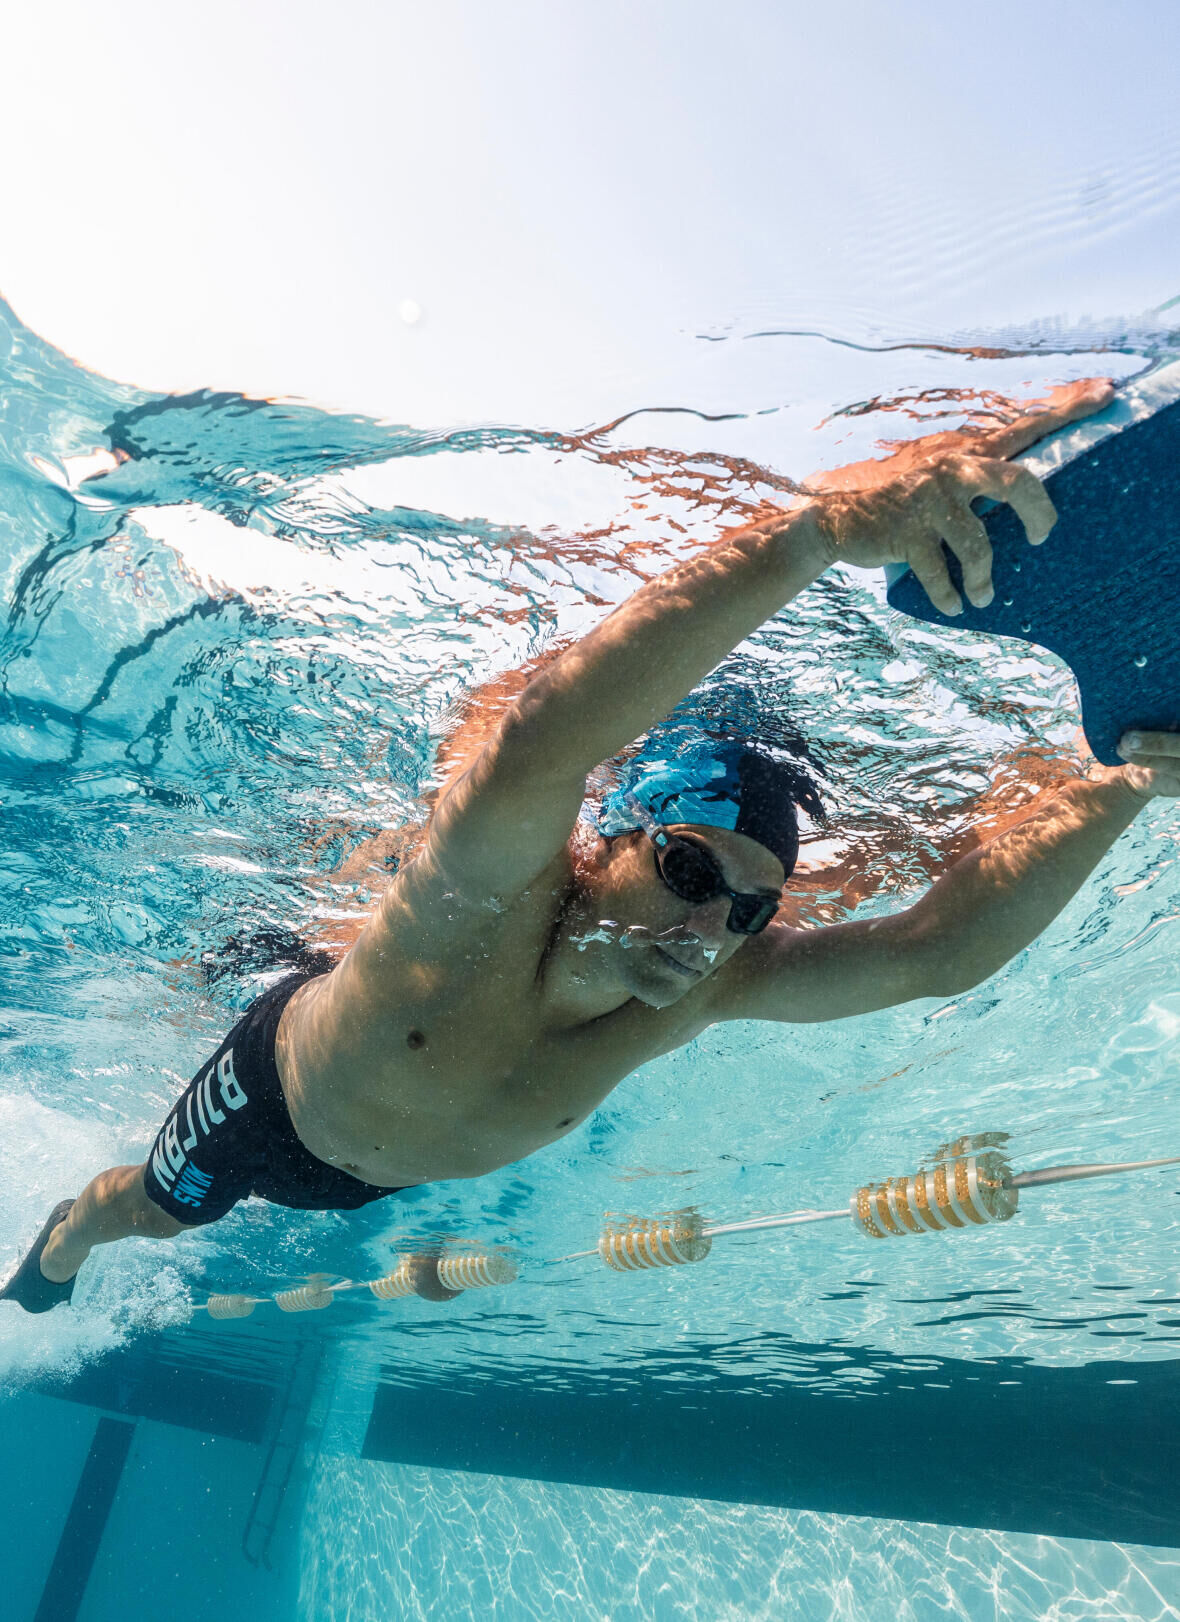 Swimming: Why swim with a board and flippers?